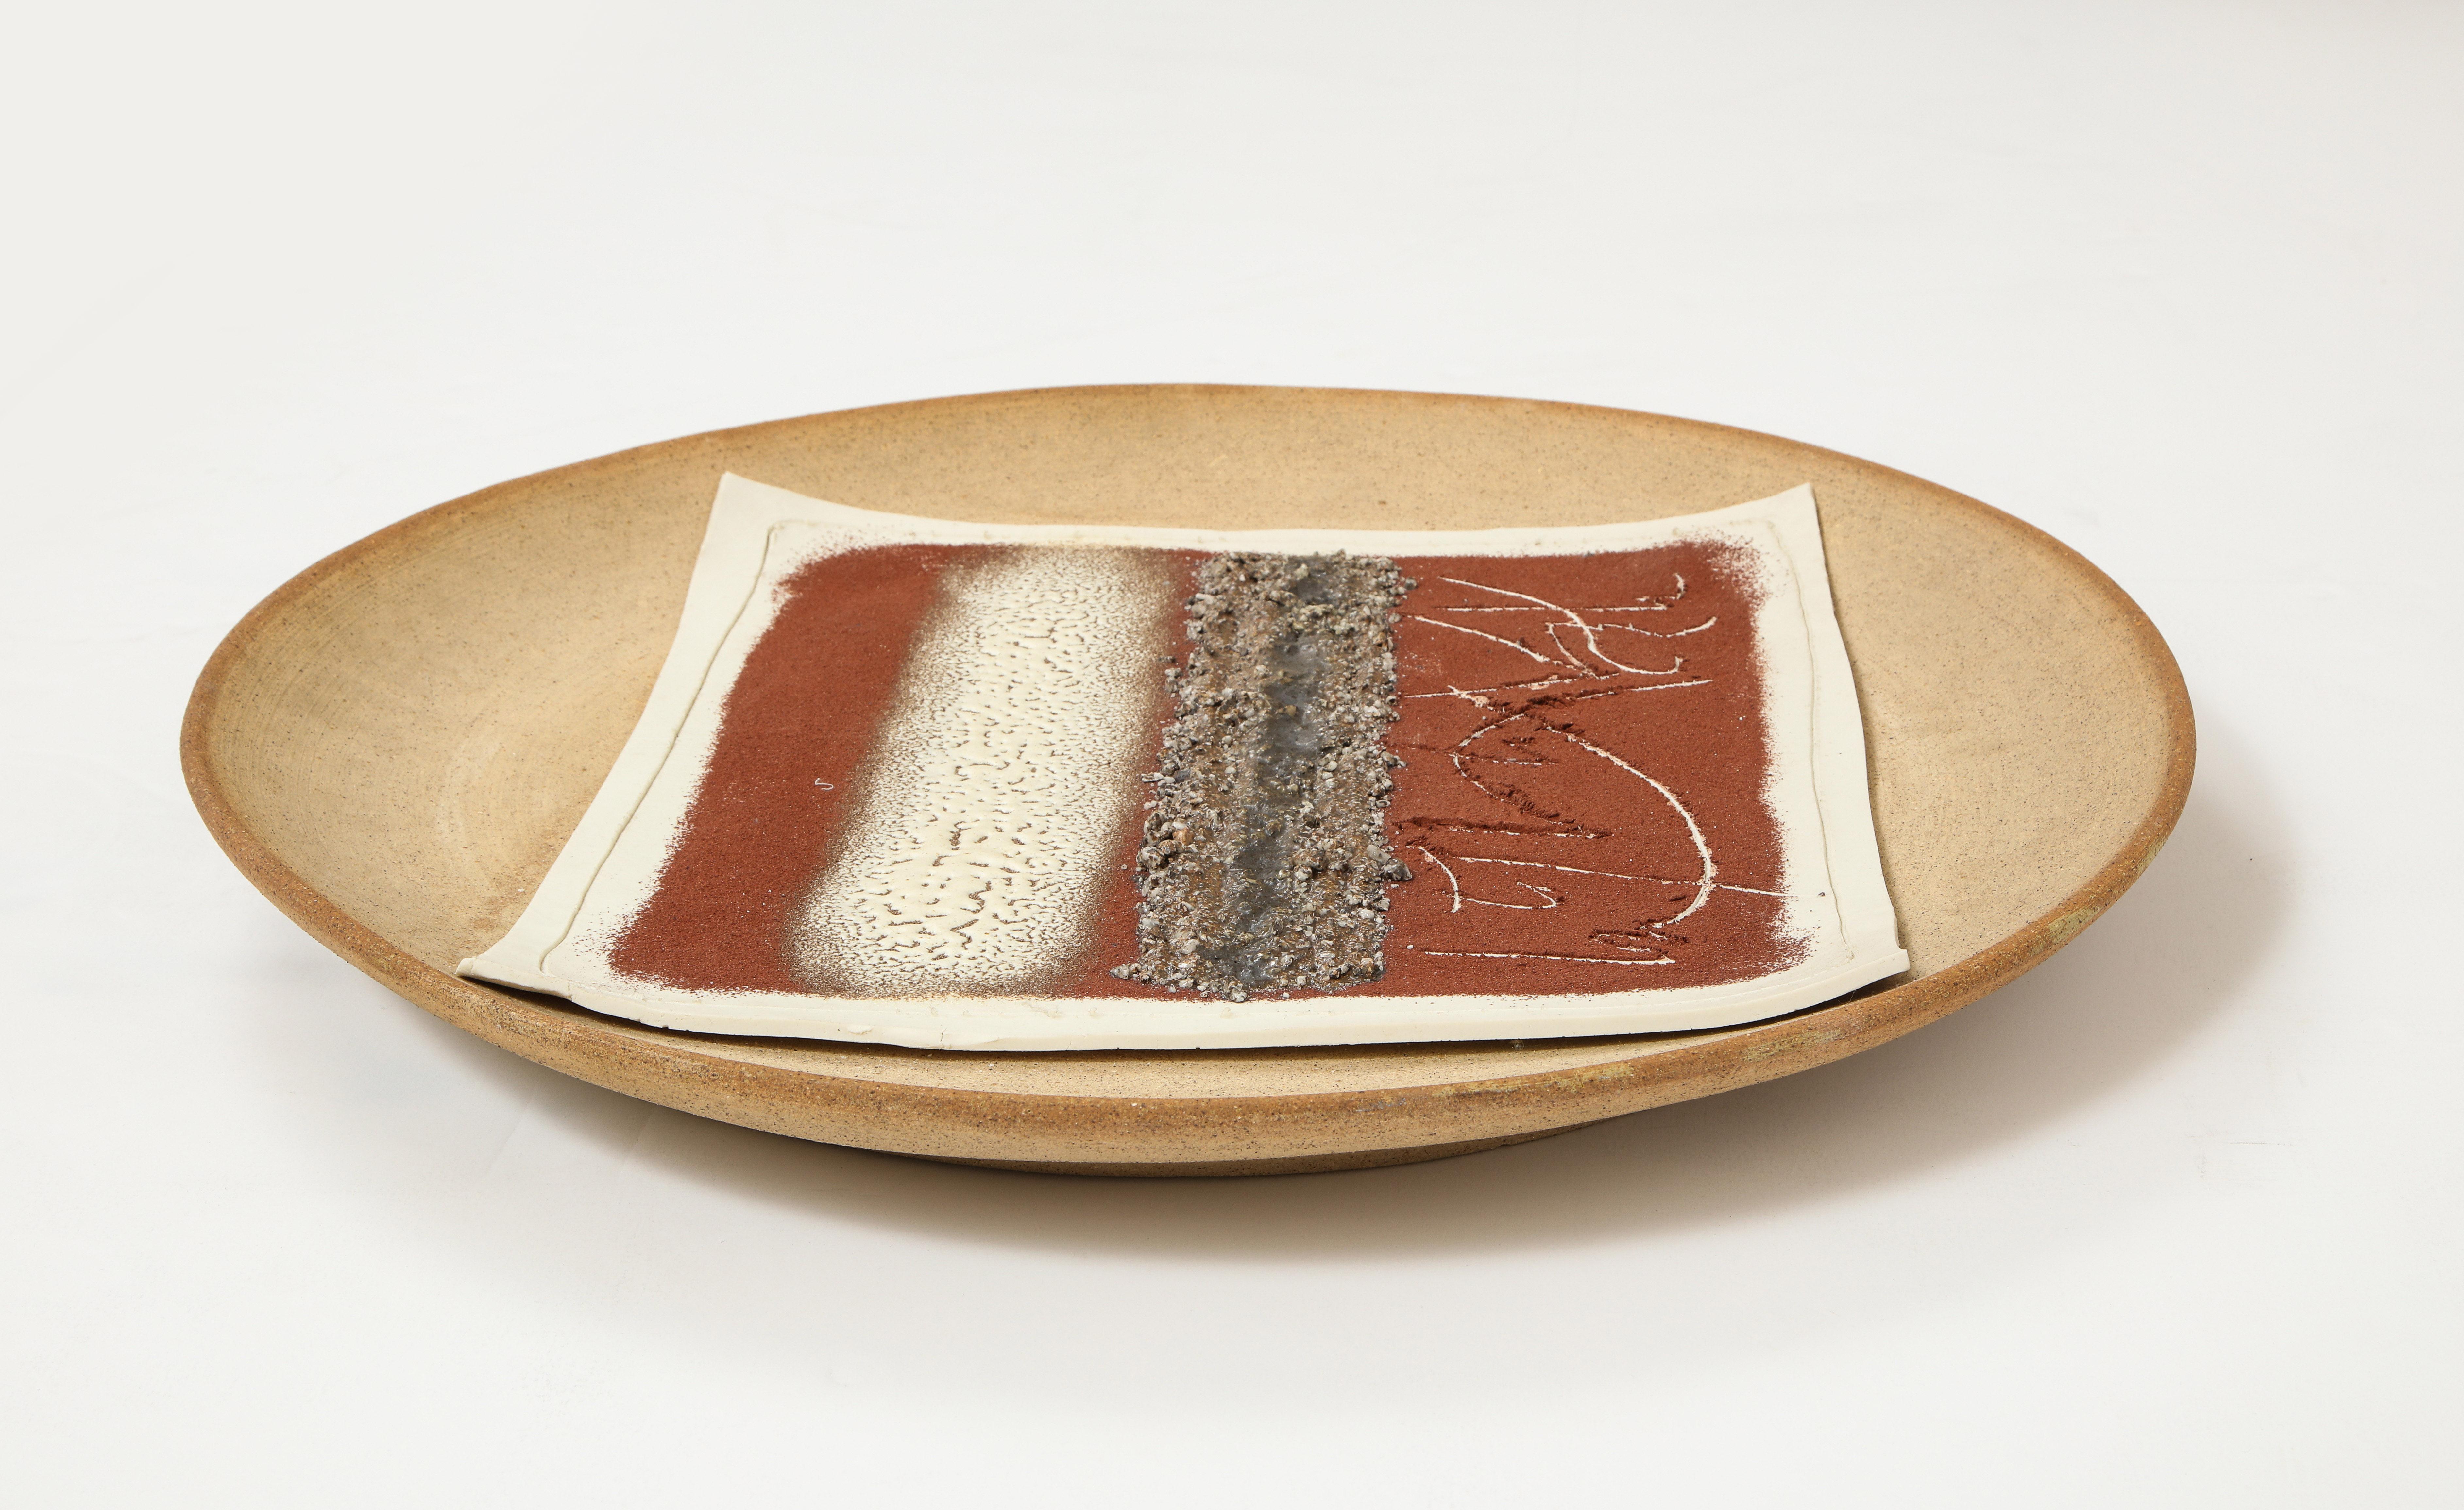 Abstract multi-color ceramic charger, Signed Bruno Gambone 2